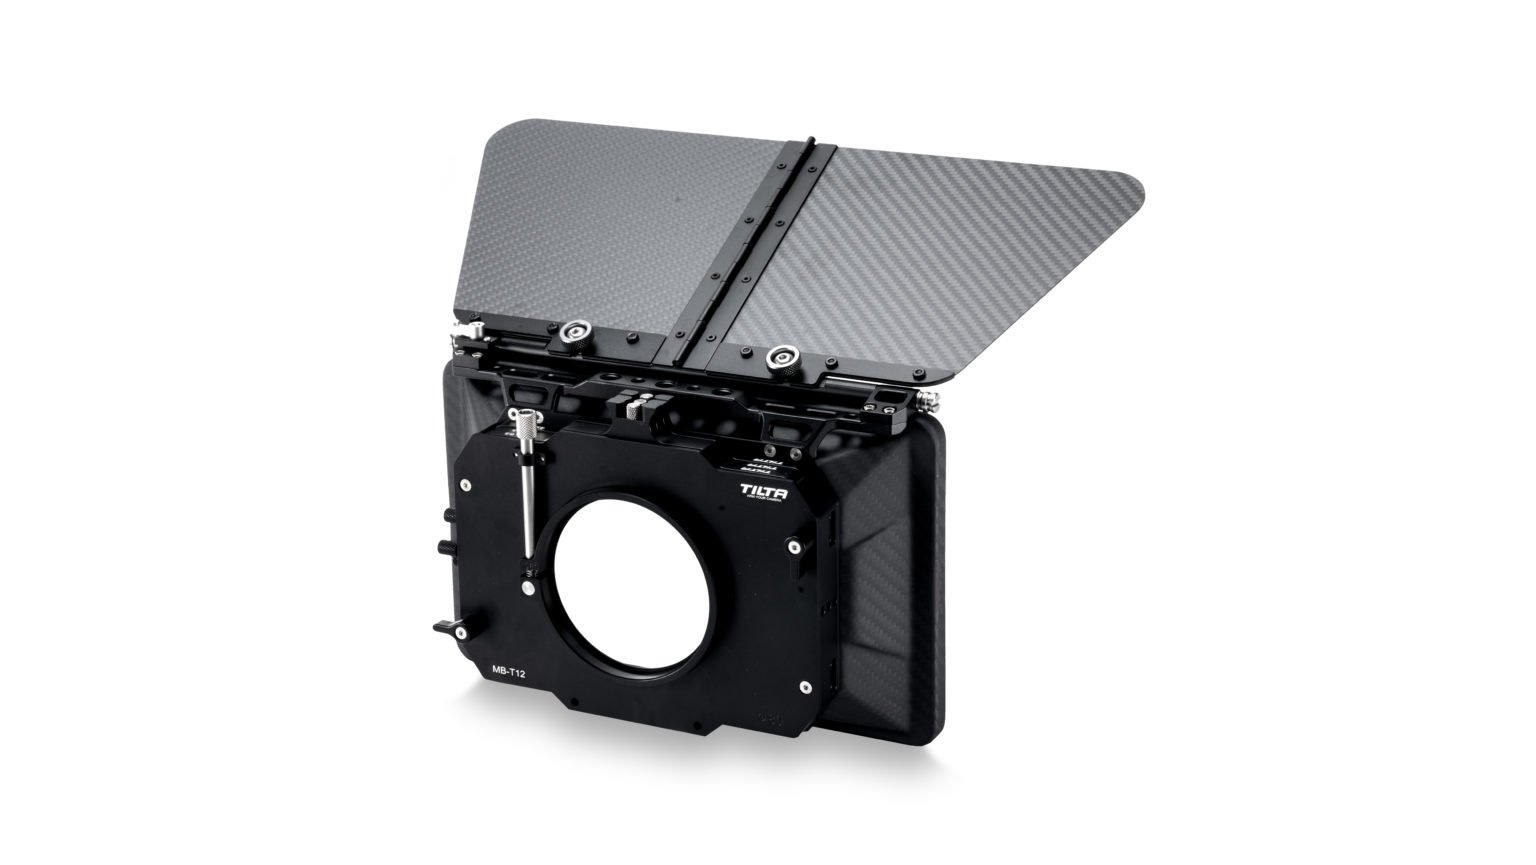 4x5.65 Carbon Fiber Matte Box (Clamp-on) with Single Backing